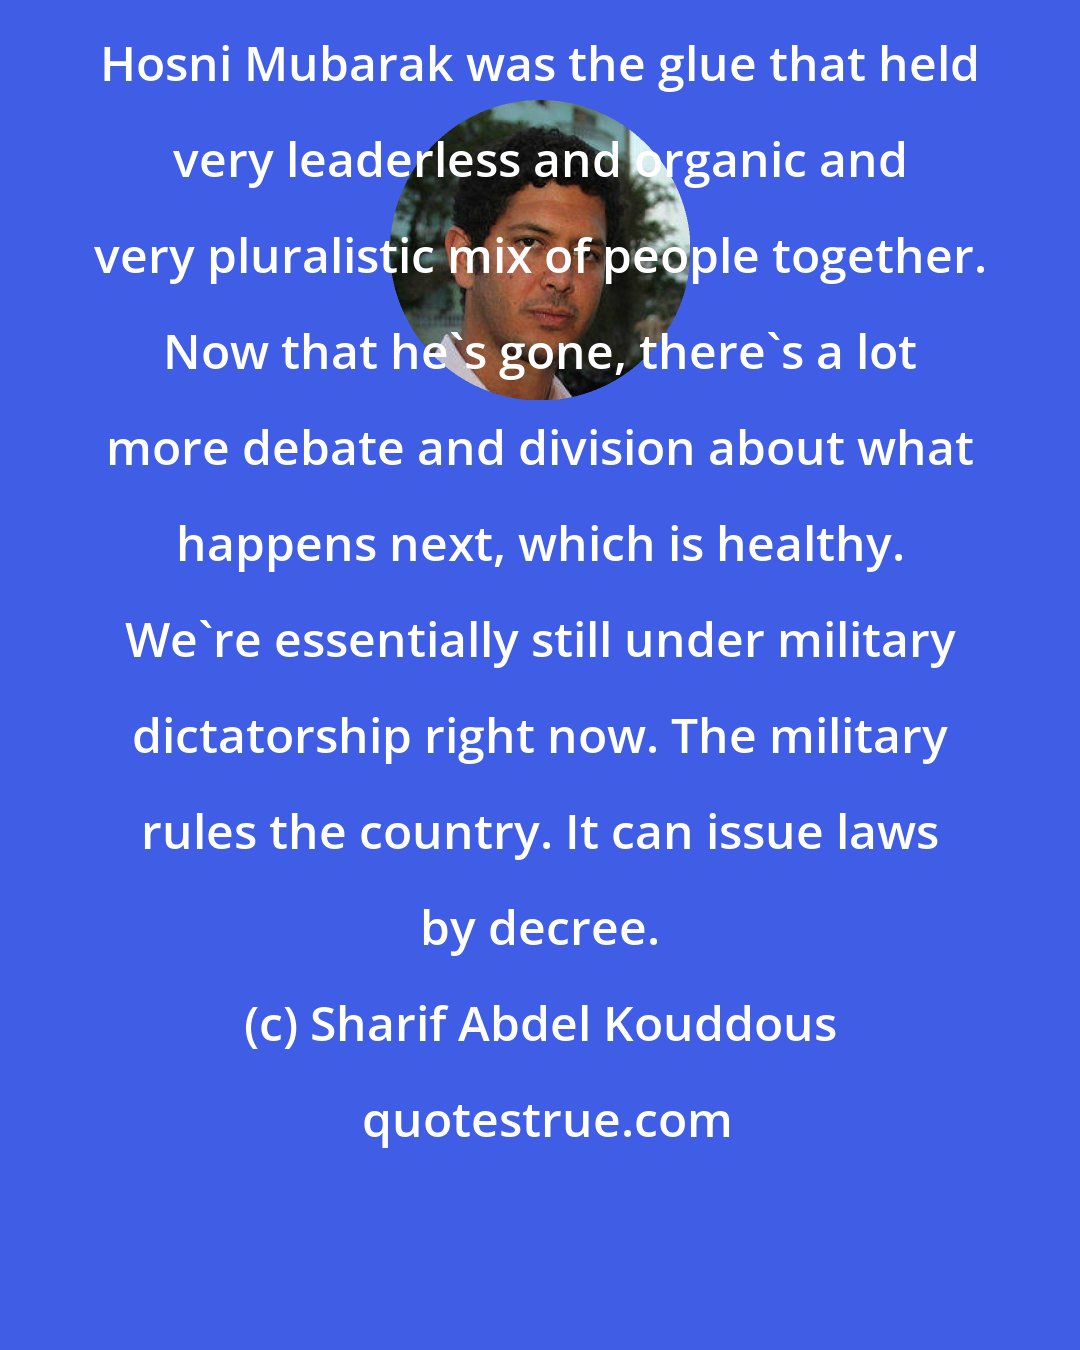 Sharif Abdel Kouddous: Hosni Mubarak was the glue that held very leaderless and organic and very pluralistic mix of people together. Now that he's gone, there's a lot more debate and division about what happens next, which is healthy. We're essentially still under military dictatorship right now. The military rules the country. It can issue laws by decree.